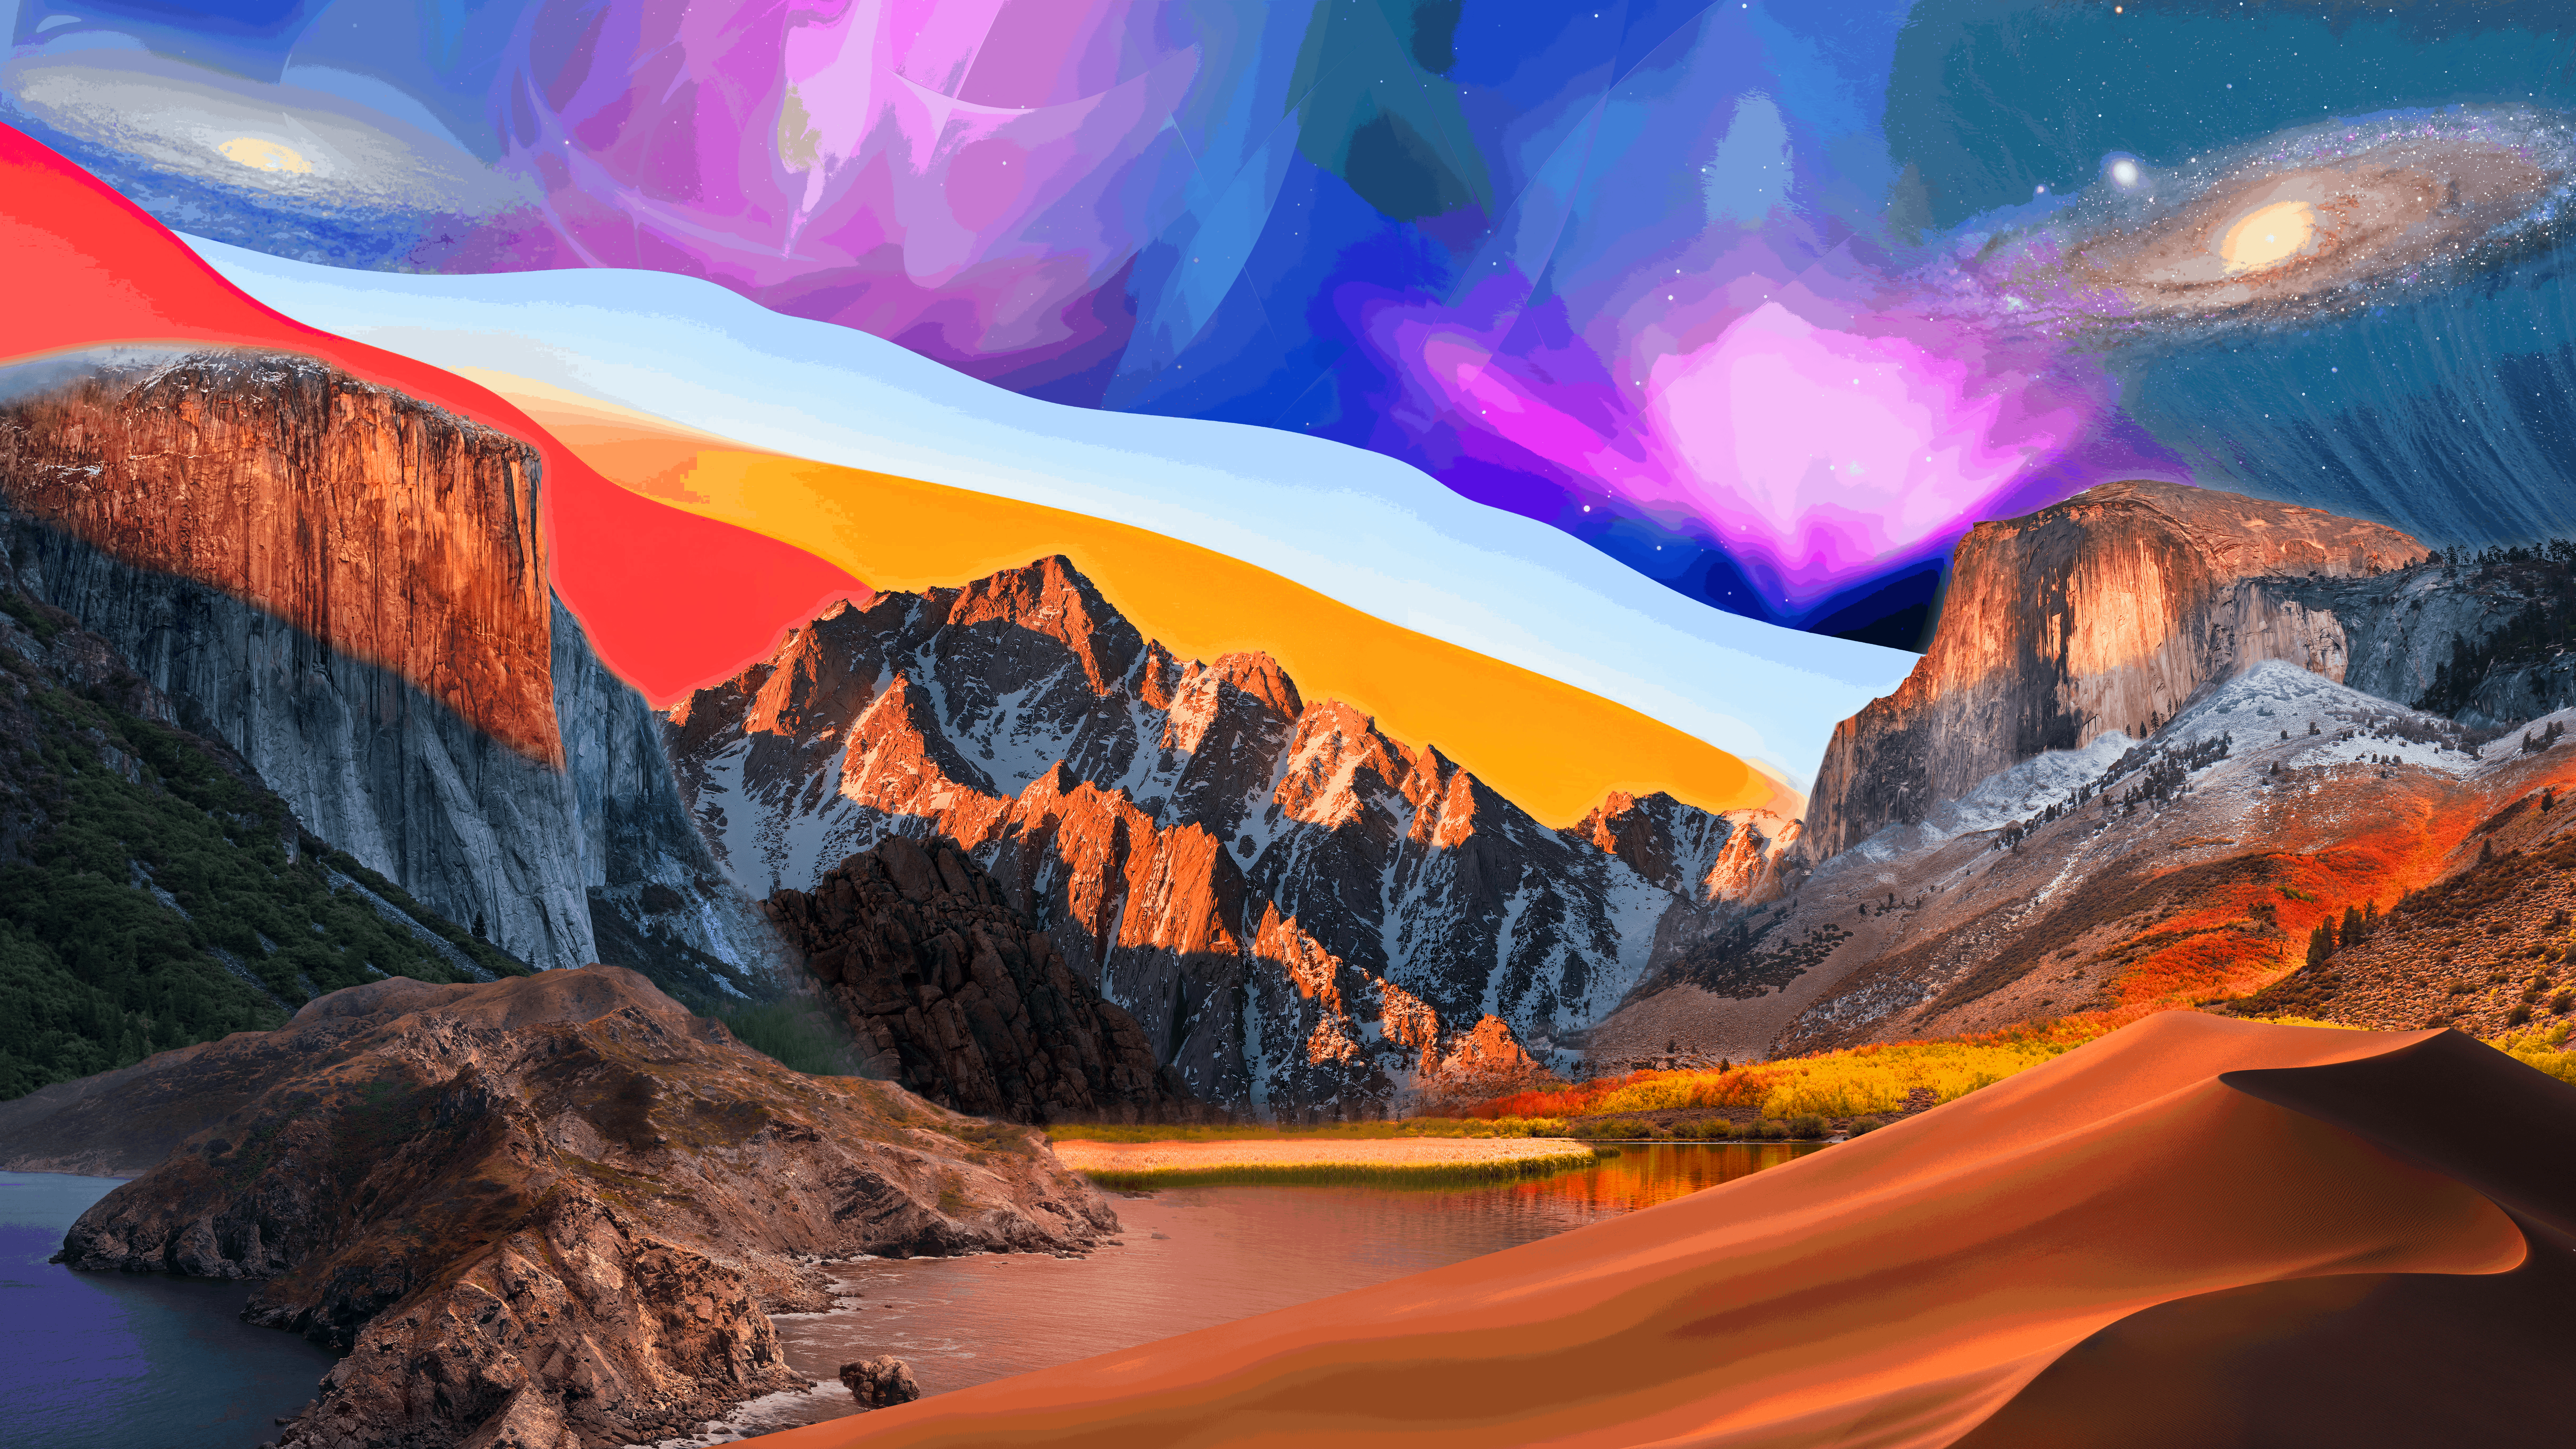 Download every macOS wallpaper in one image